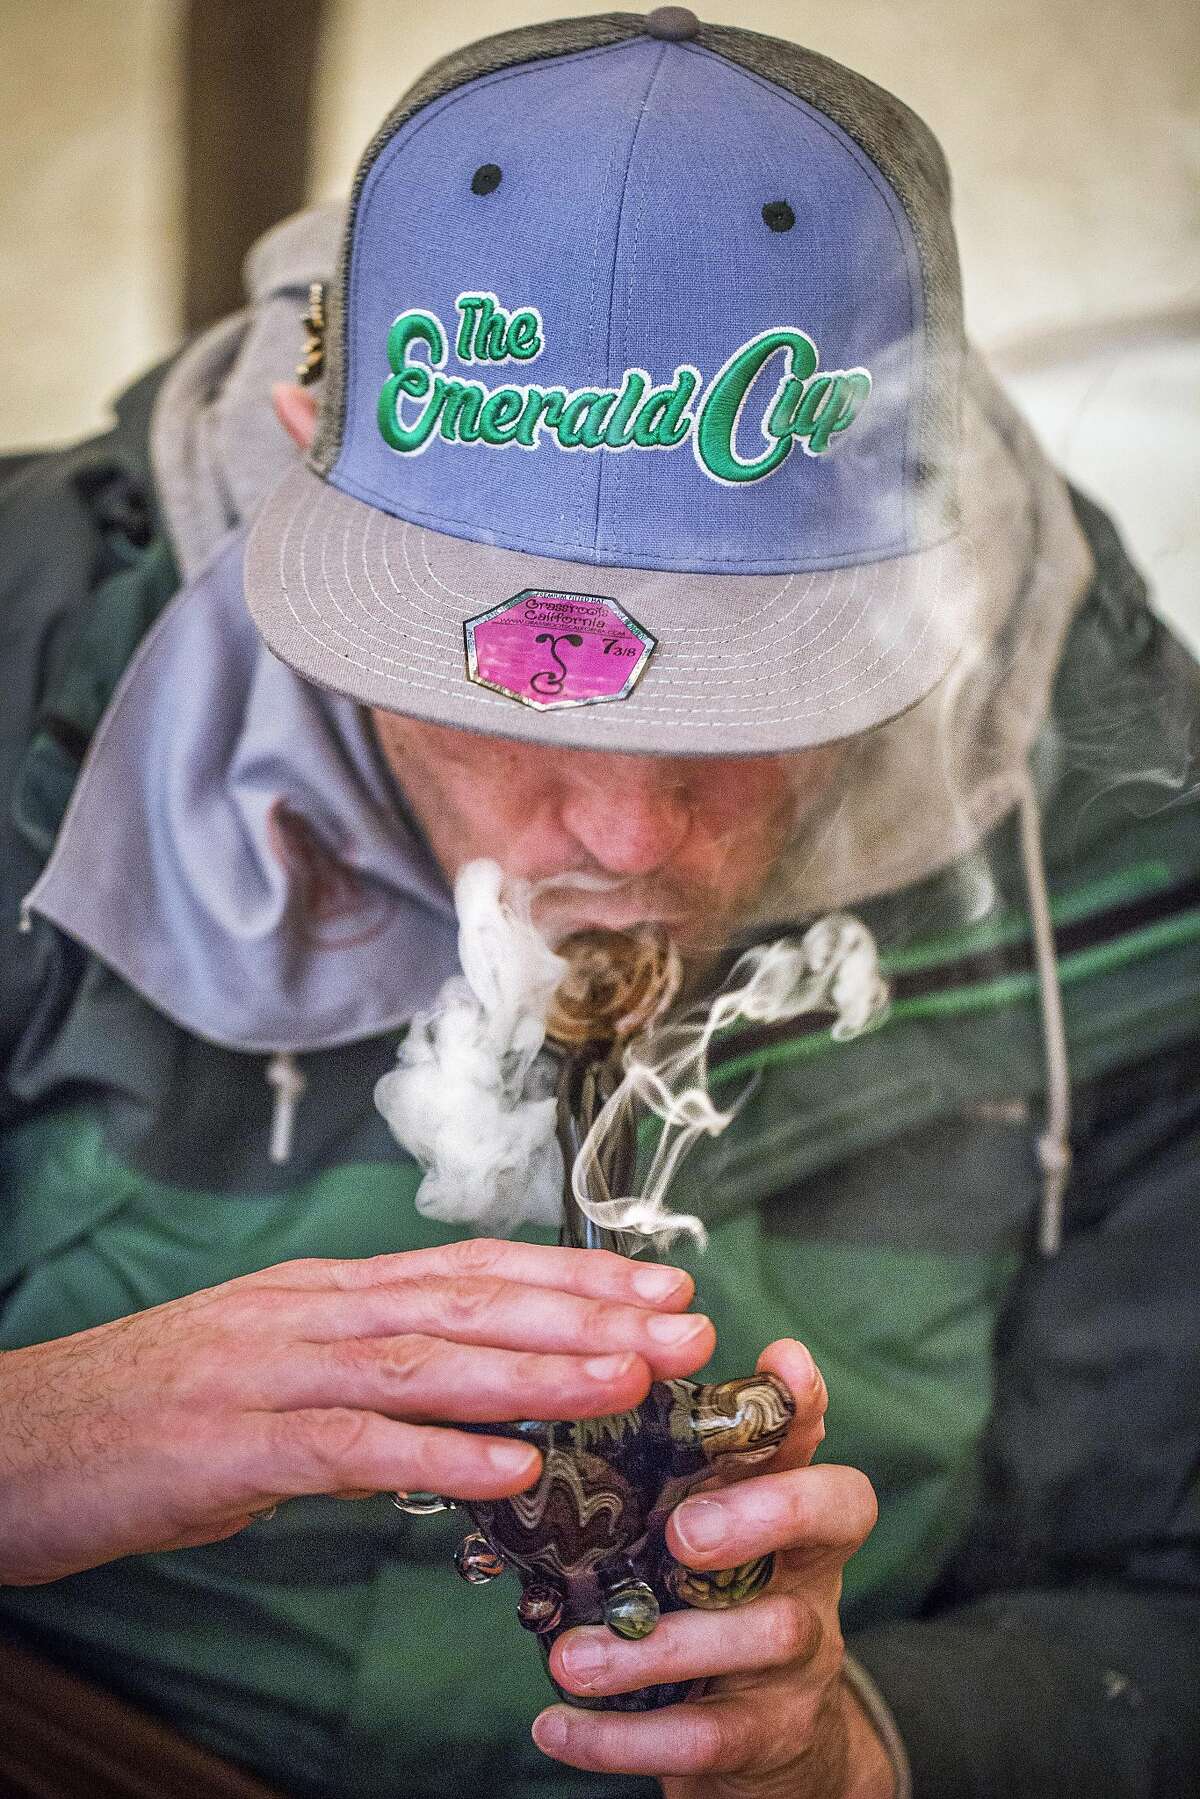 Zelly Rock takes a hit of weed inside a teepee Saturday, Dec. 10, 2016 in Santa Rosa, CA at the Emerald Cup -- a 30,000 person cannabis county fair; the world's largest. This is the first big pot party since Prop 64 has passed, ad out angle is focusing on the newcomers to the massive, sprawling event.